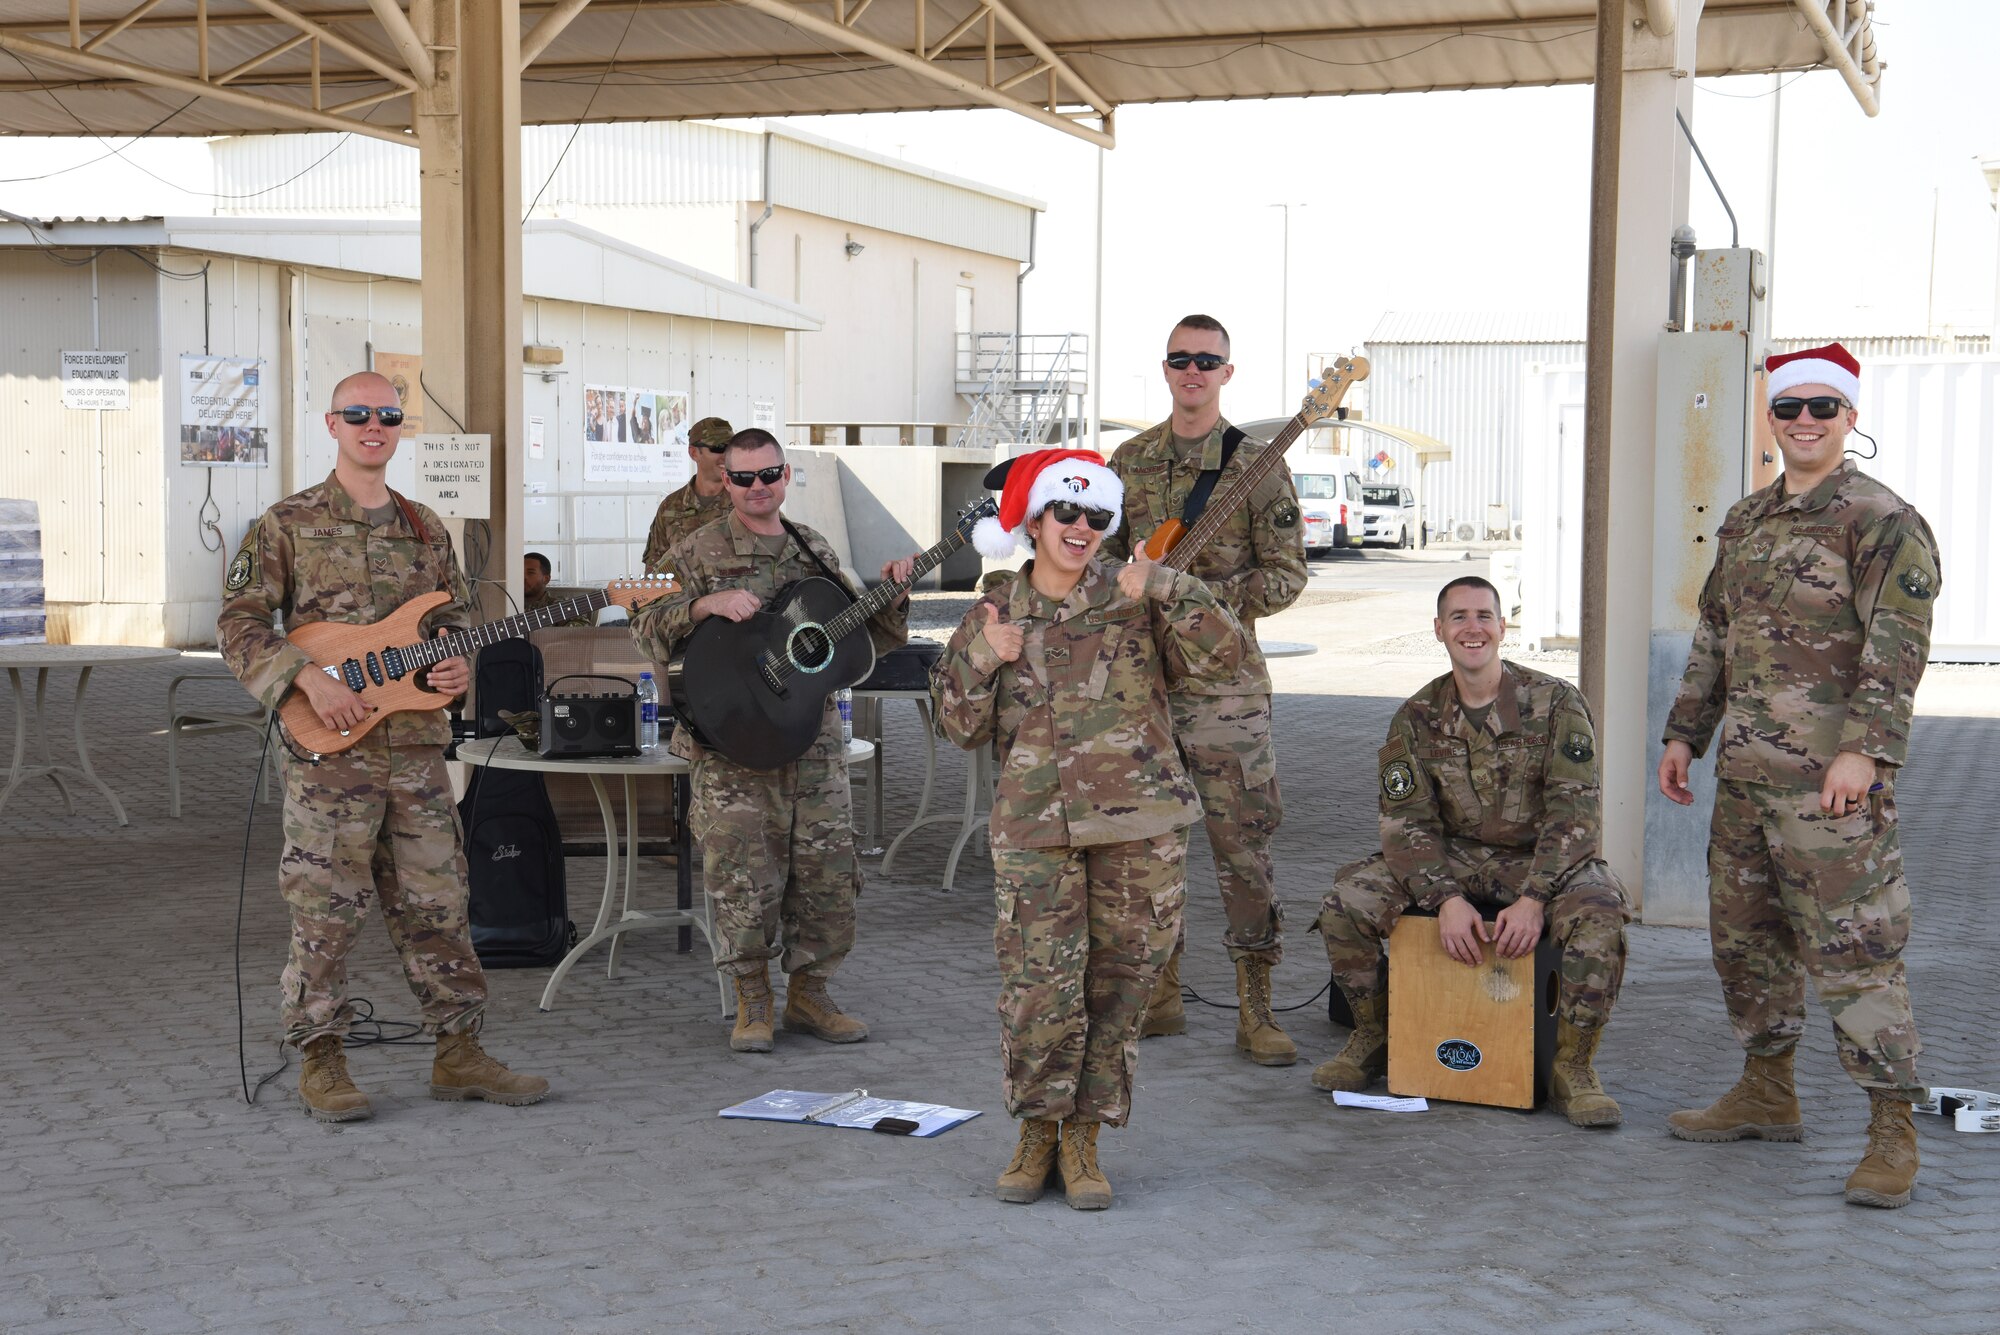 The AFCENT band visited to perform various popular songs for deployed members.